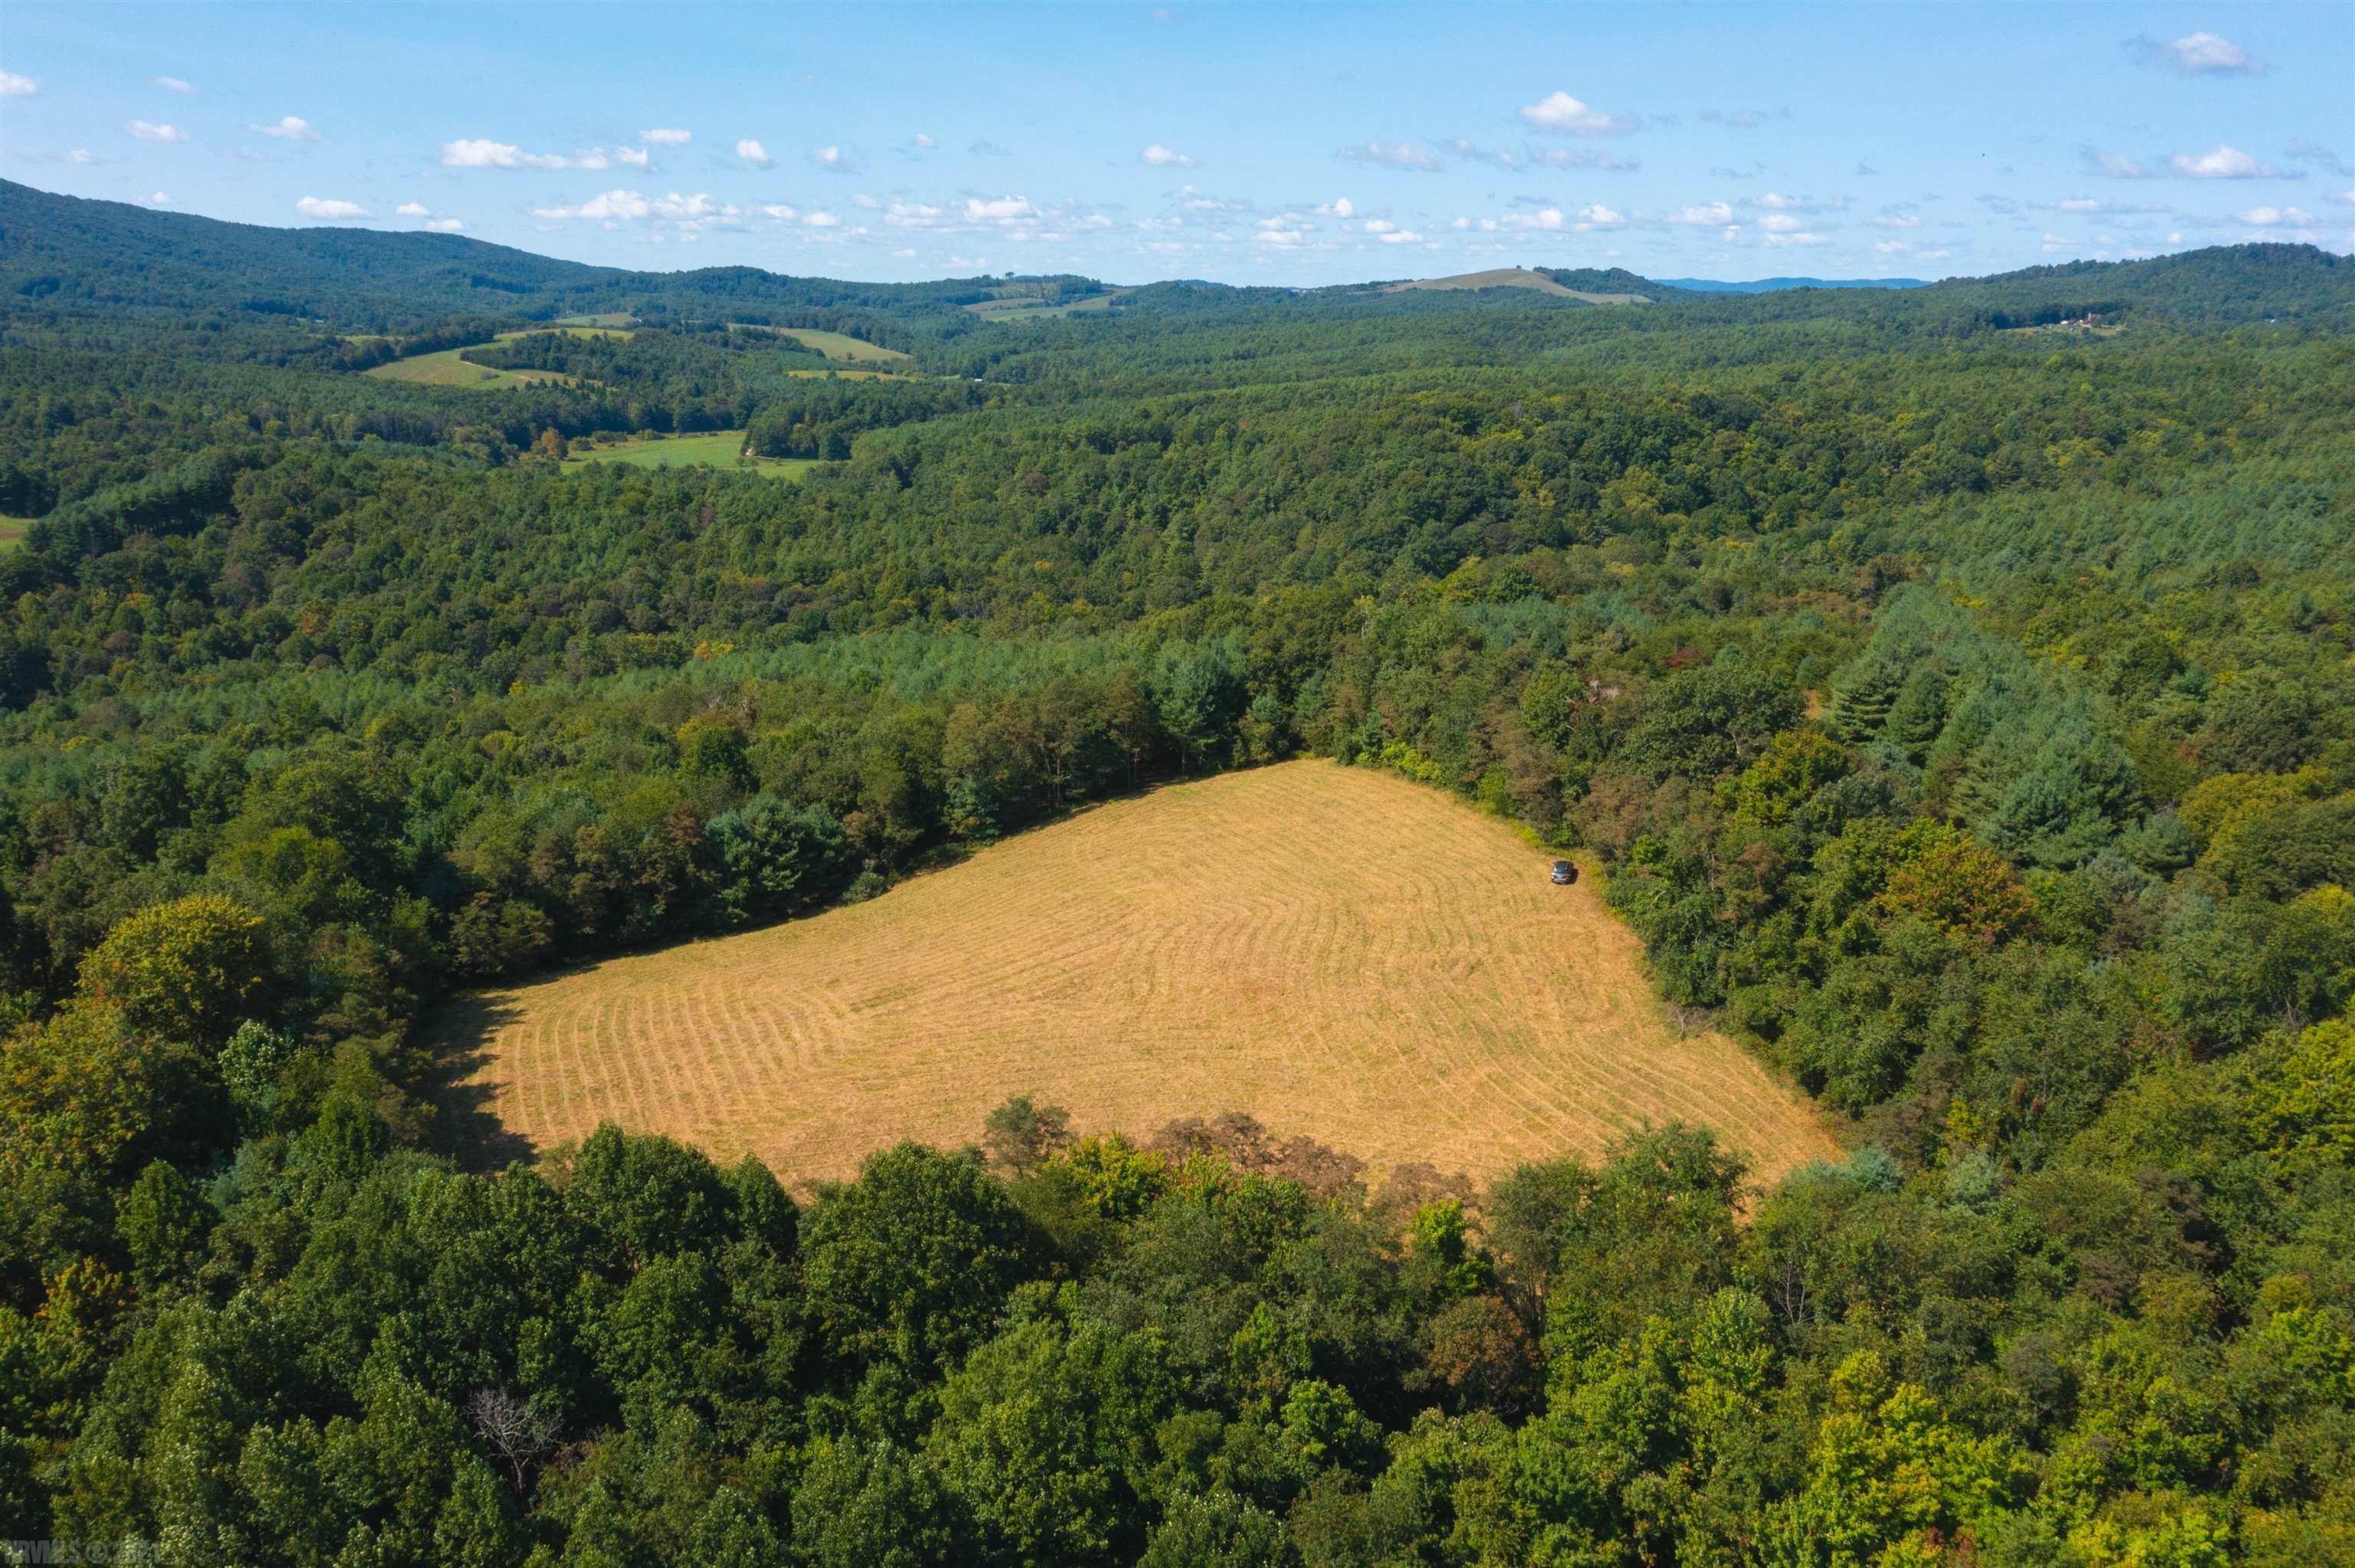 Online Only Auction ending November 10th @ 4 PM. Price is starting bid, not reserve.You have the opportunity to purchase a gorgeous property for sale in Floyd VA. This property features 37.79 +/- acres of land on Beaver Creek Rd. Looking for land with great building spots, long range views and creek frontage? This is it! Build your dream home in the large open field which showcases gorgeous mountain views. This property would be great for use as a recreational retreat, hobby farm or private homestead. The property is in an excellent location near Route 8 between Floyd VA and Christiansburg VA.